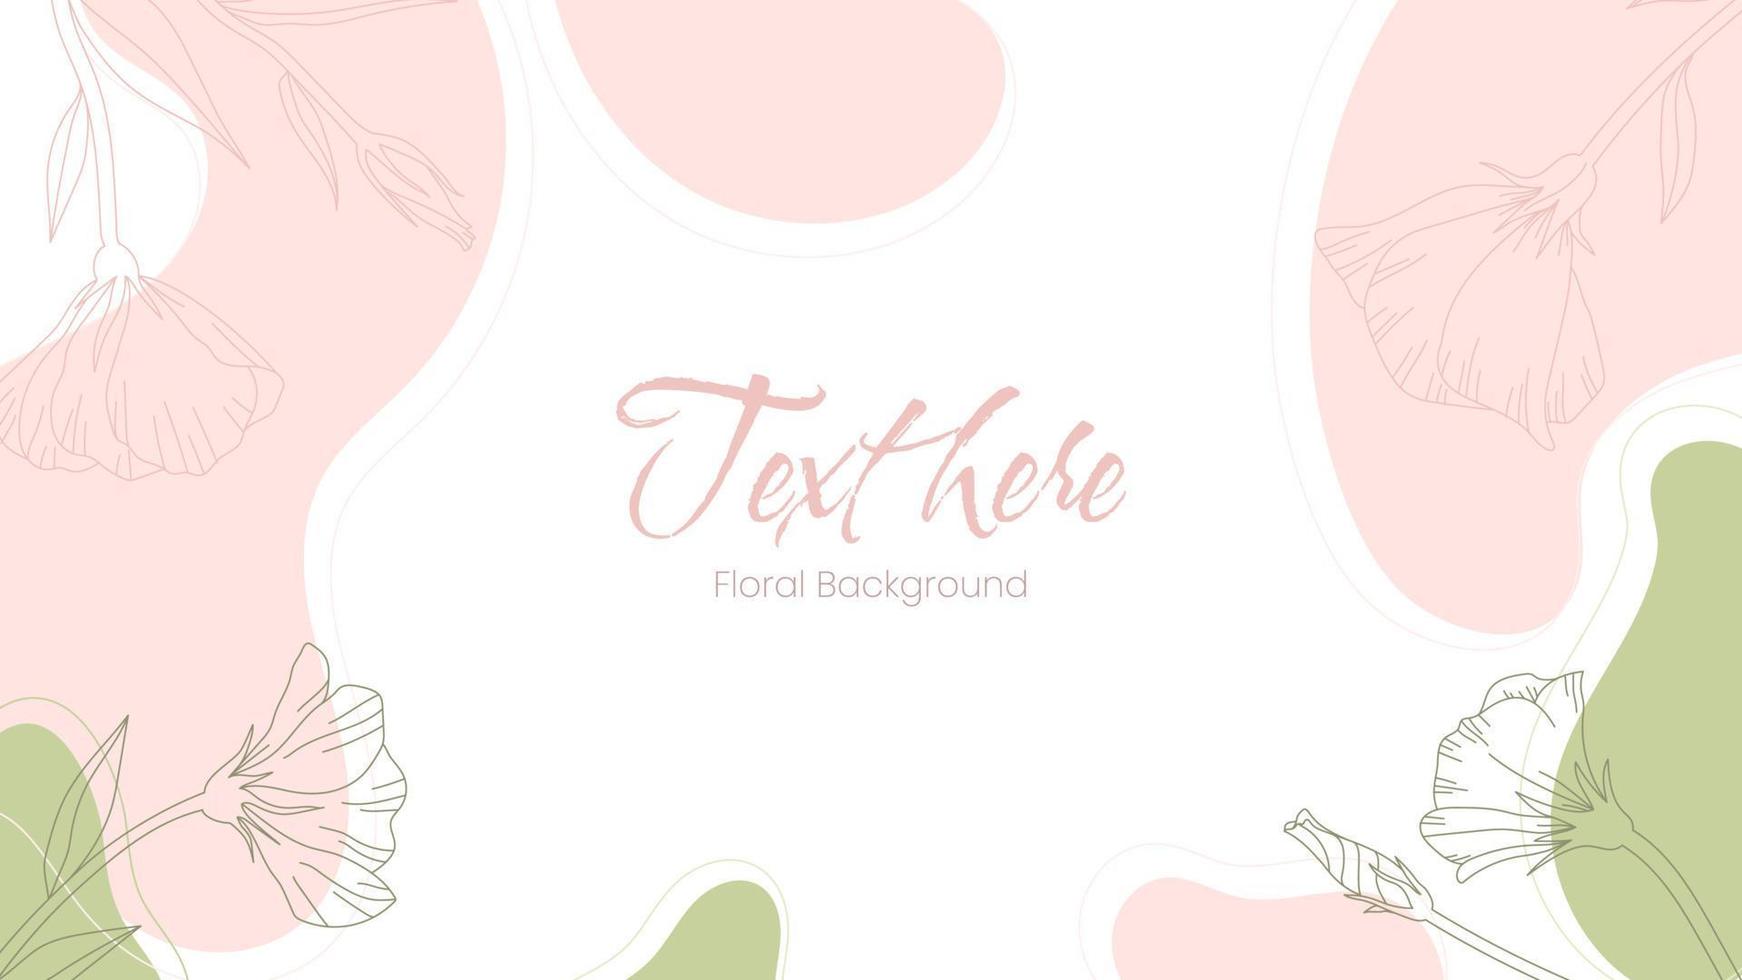 Trendy abstract background with fluid shapes and floral element in pastel colors. Modern geometric wave with flowers vector for card, poster, blog, wallpaper, wedding invitation. Vector illustration.